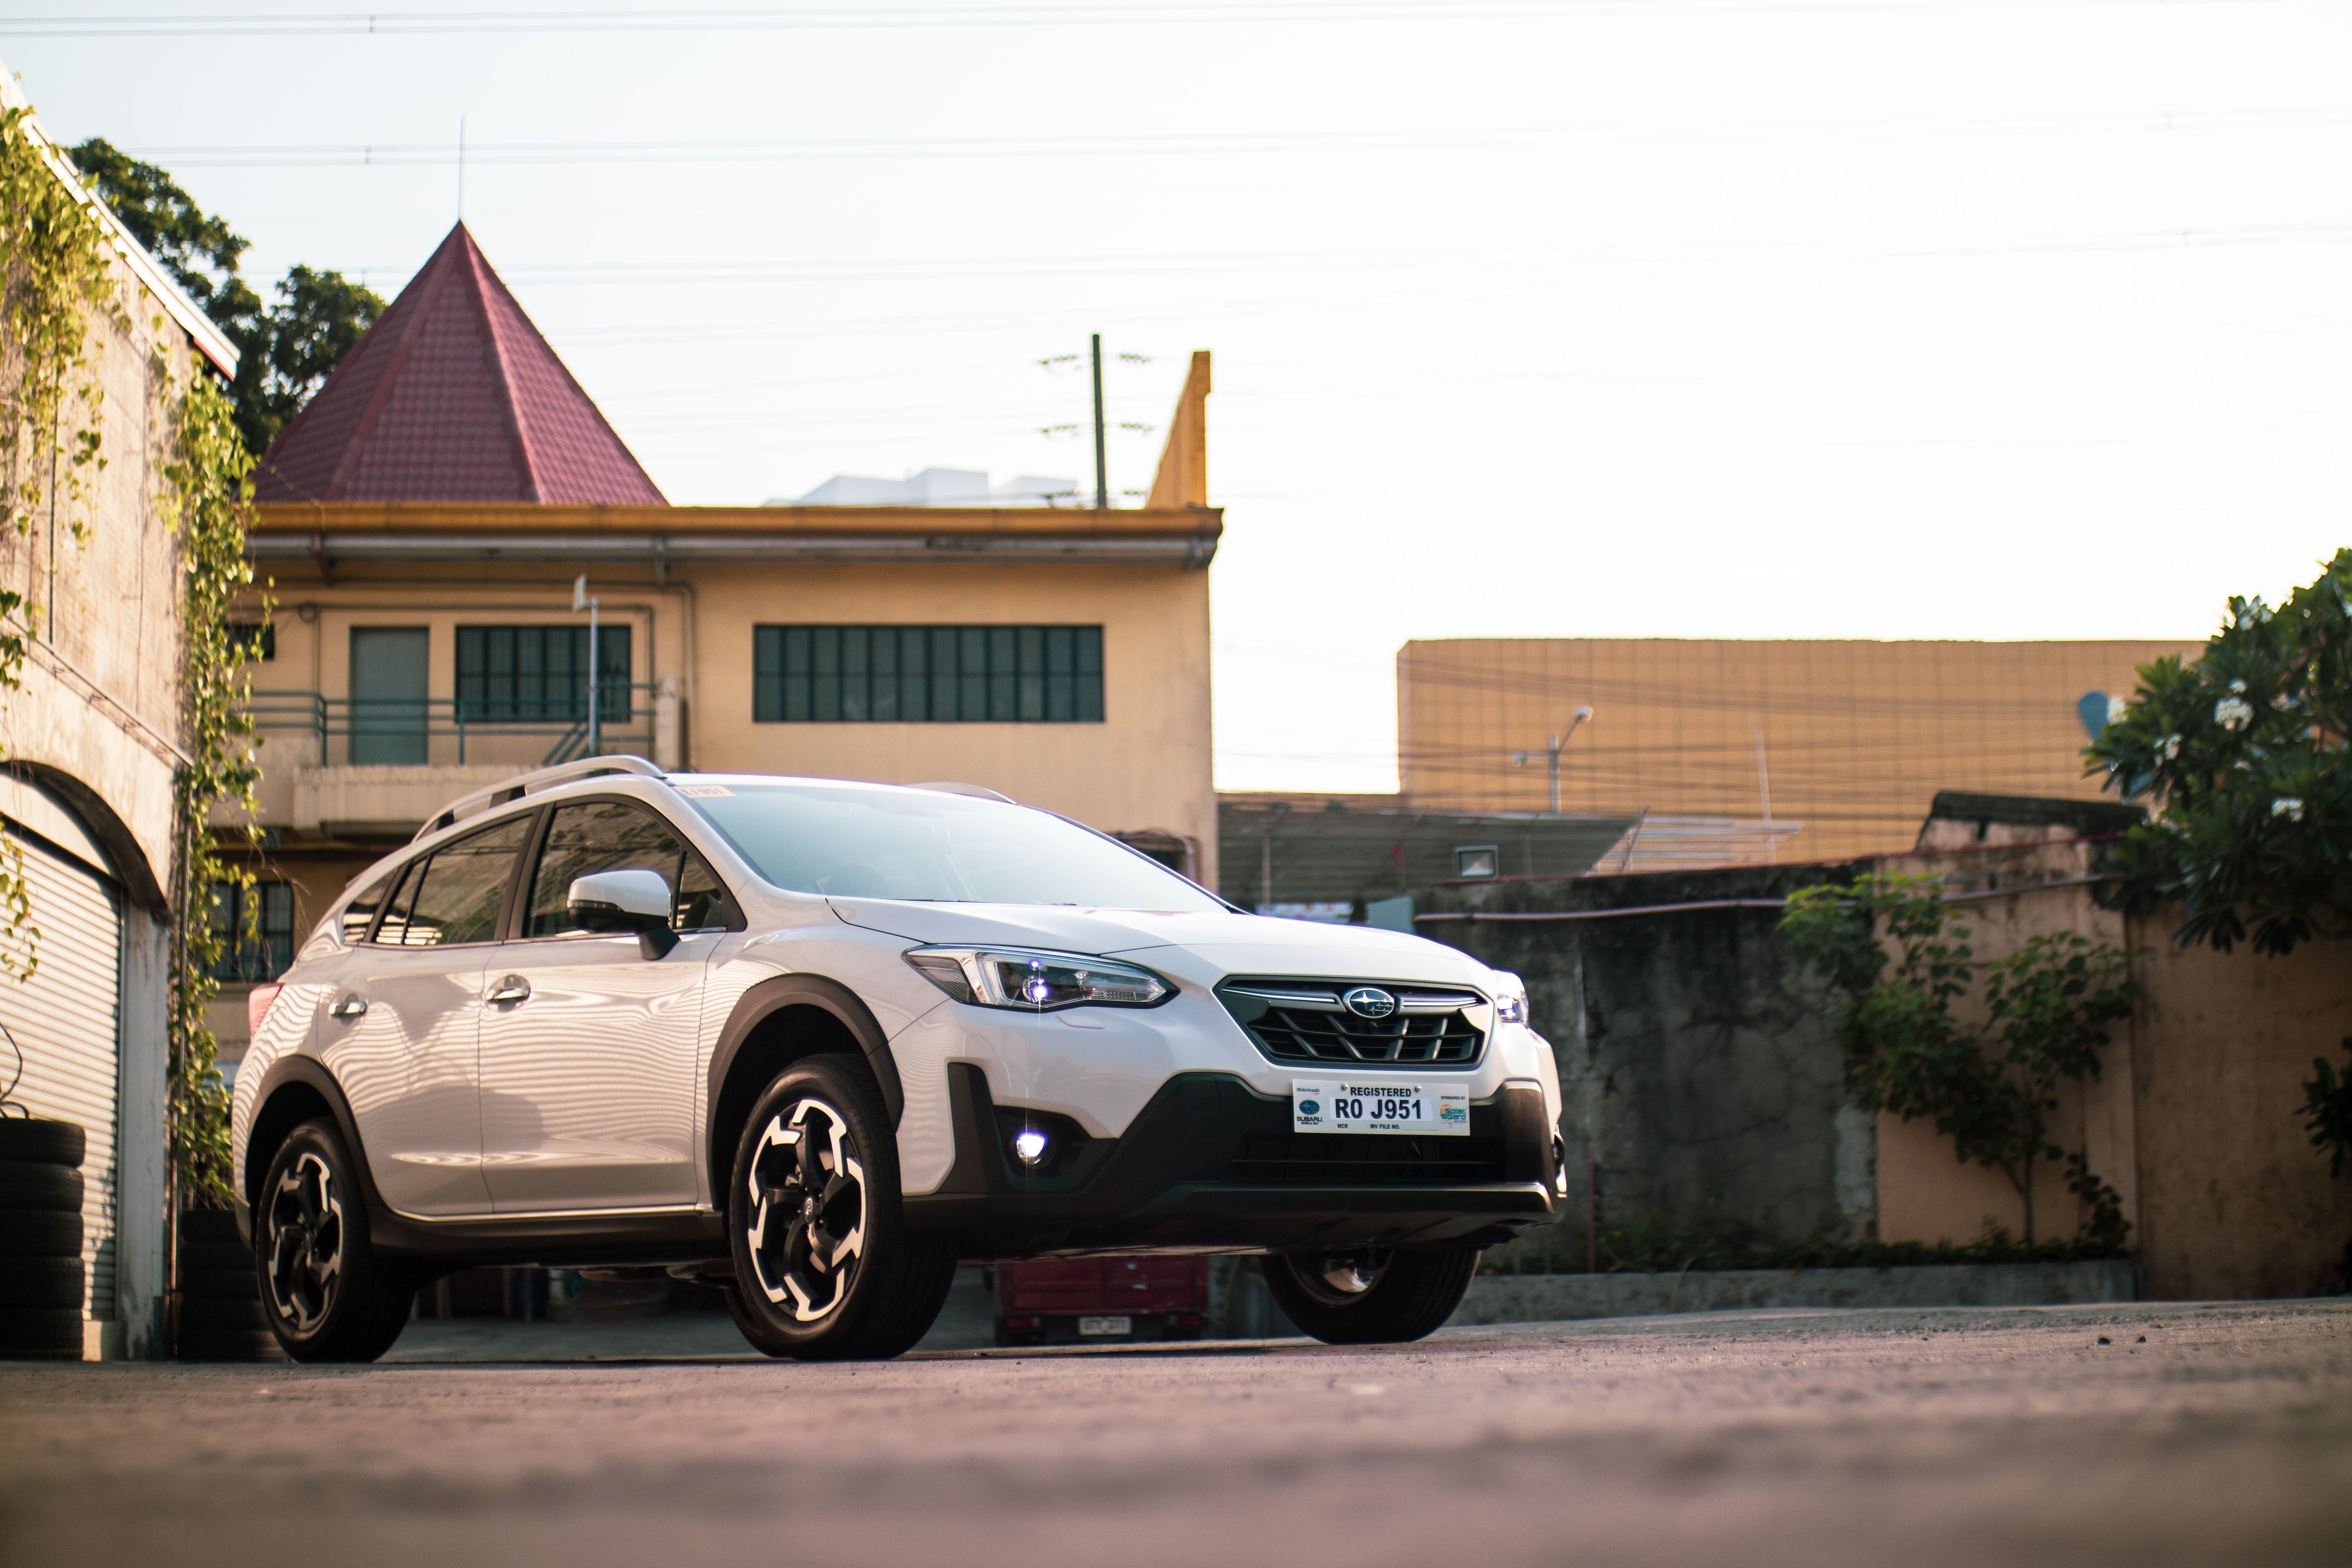 Welcome 2022 with a new Subaru! Special promos for XV, Forester and Evoltis